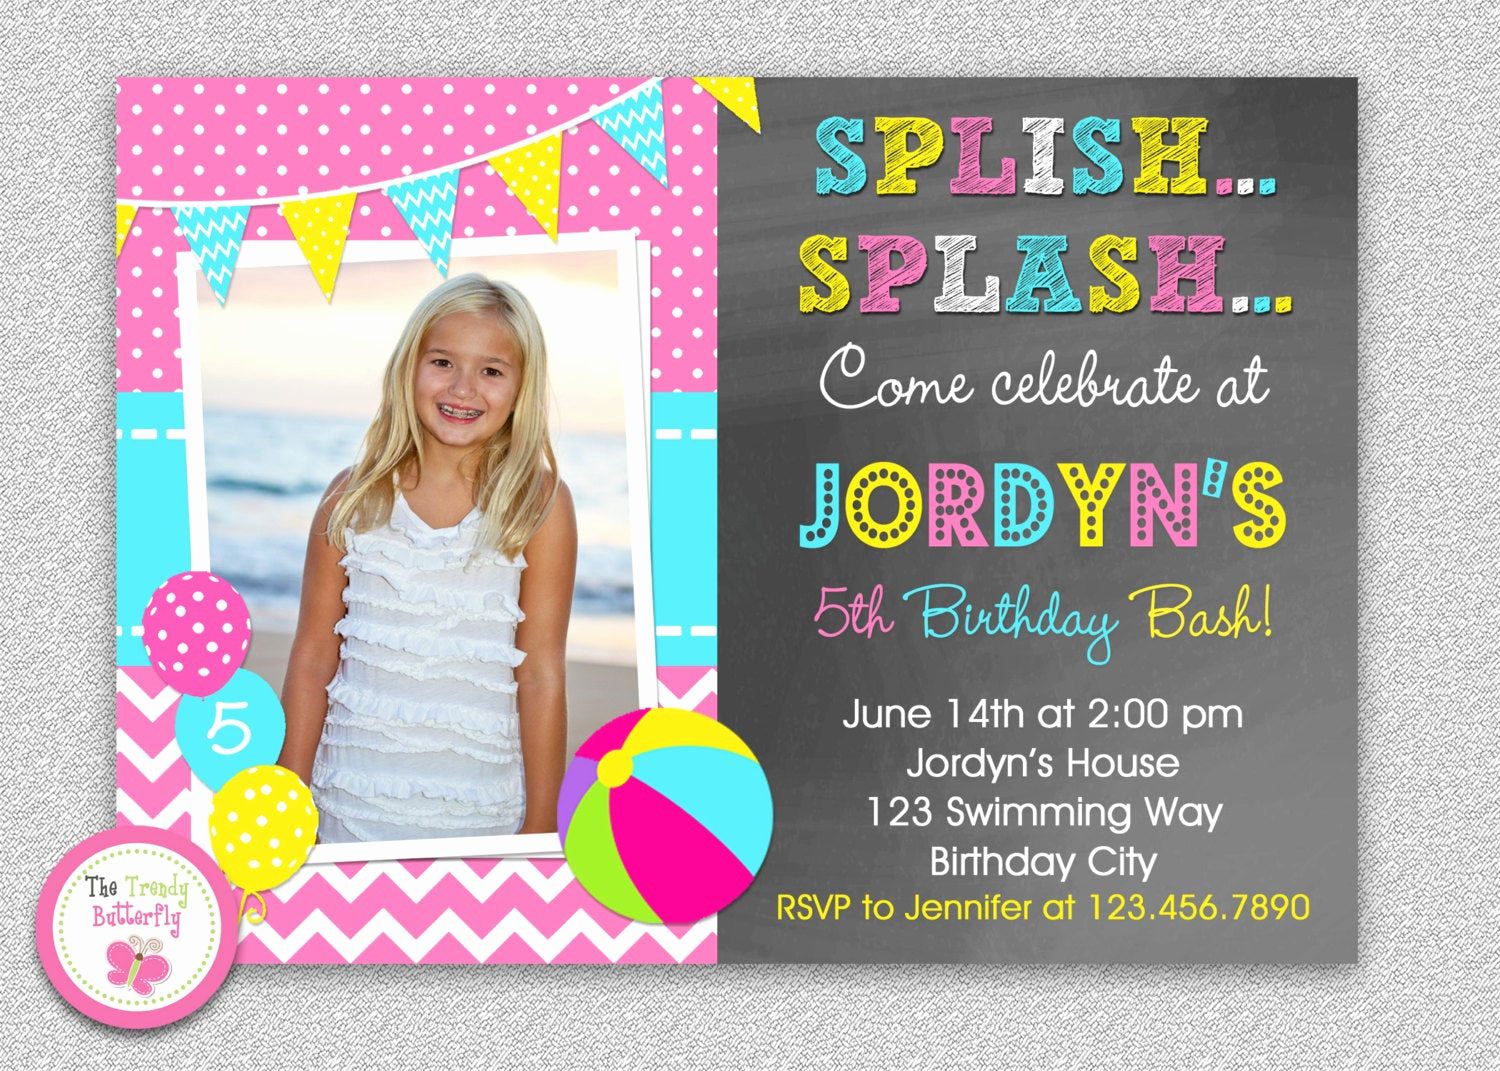 Pool Birthday Party Invitation New Pool Party Birthday Invitation Pool Party Invitations